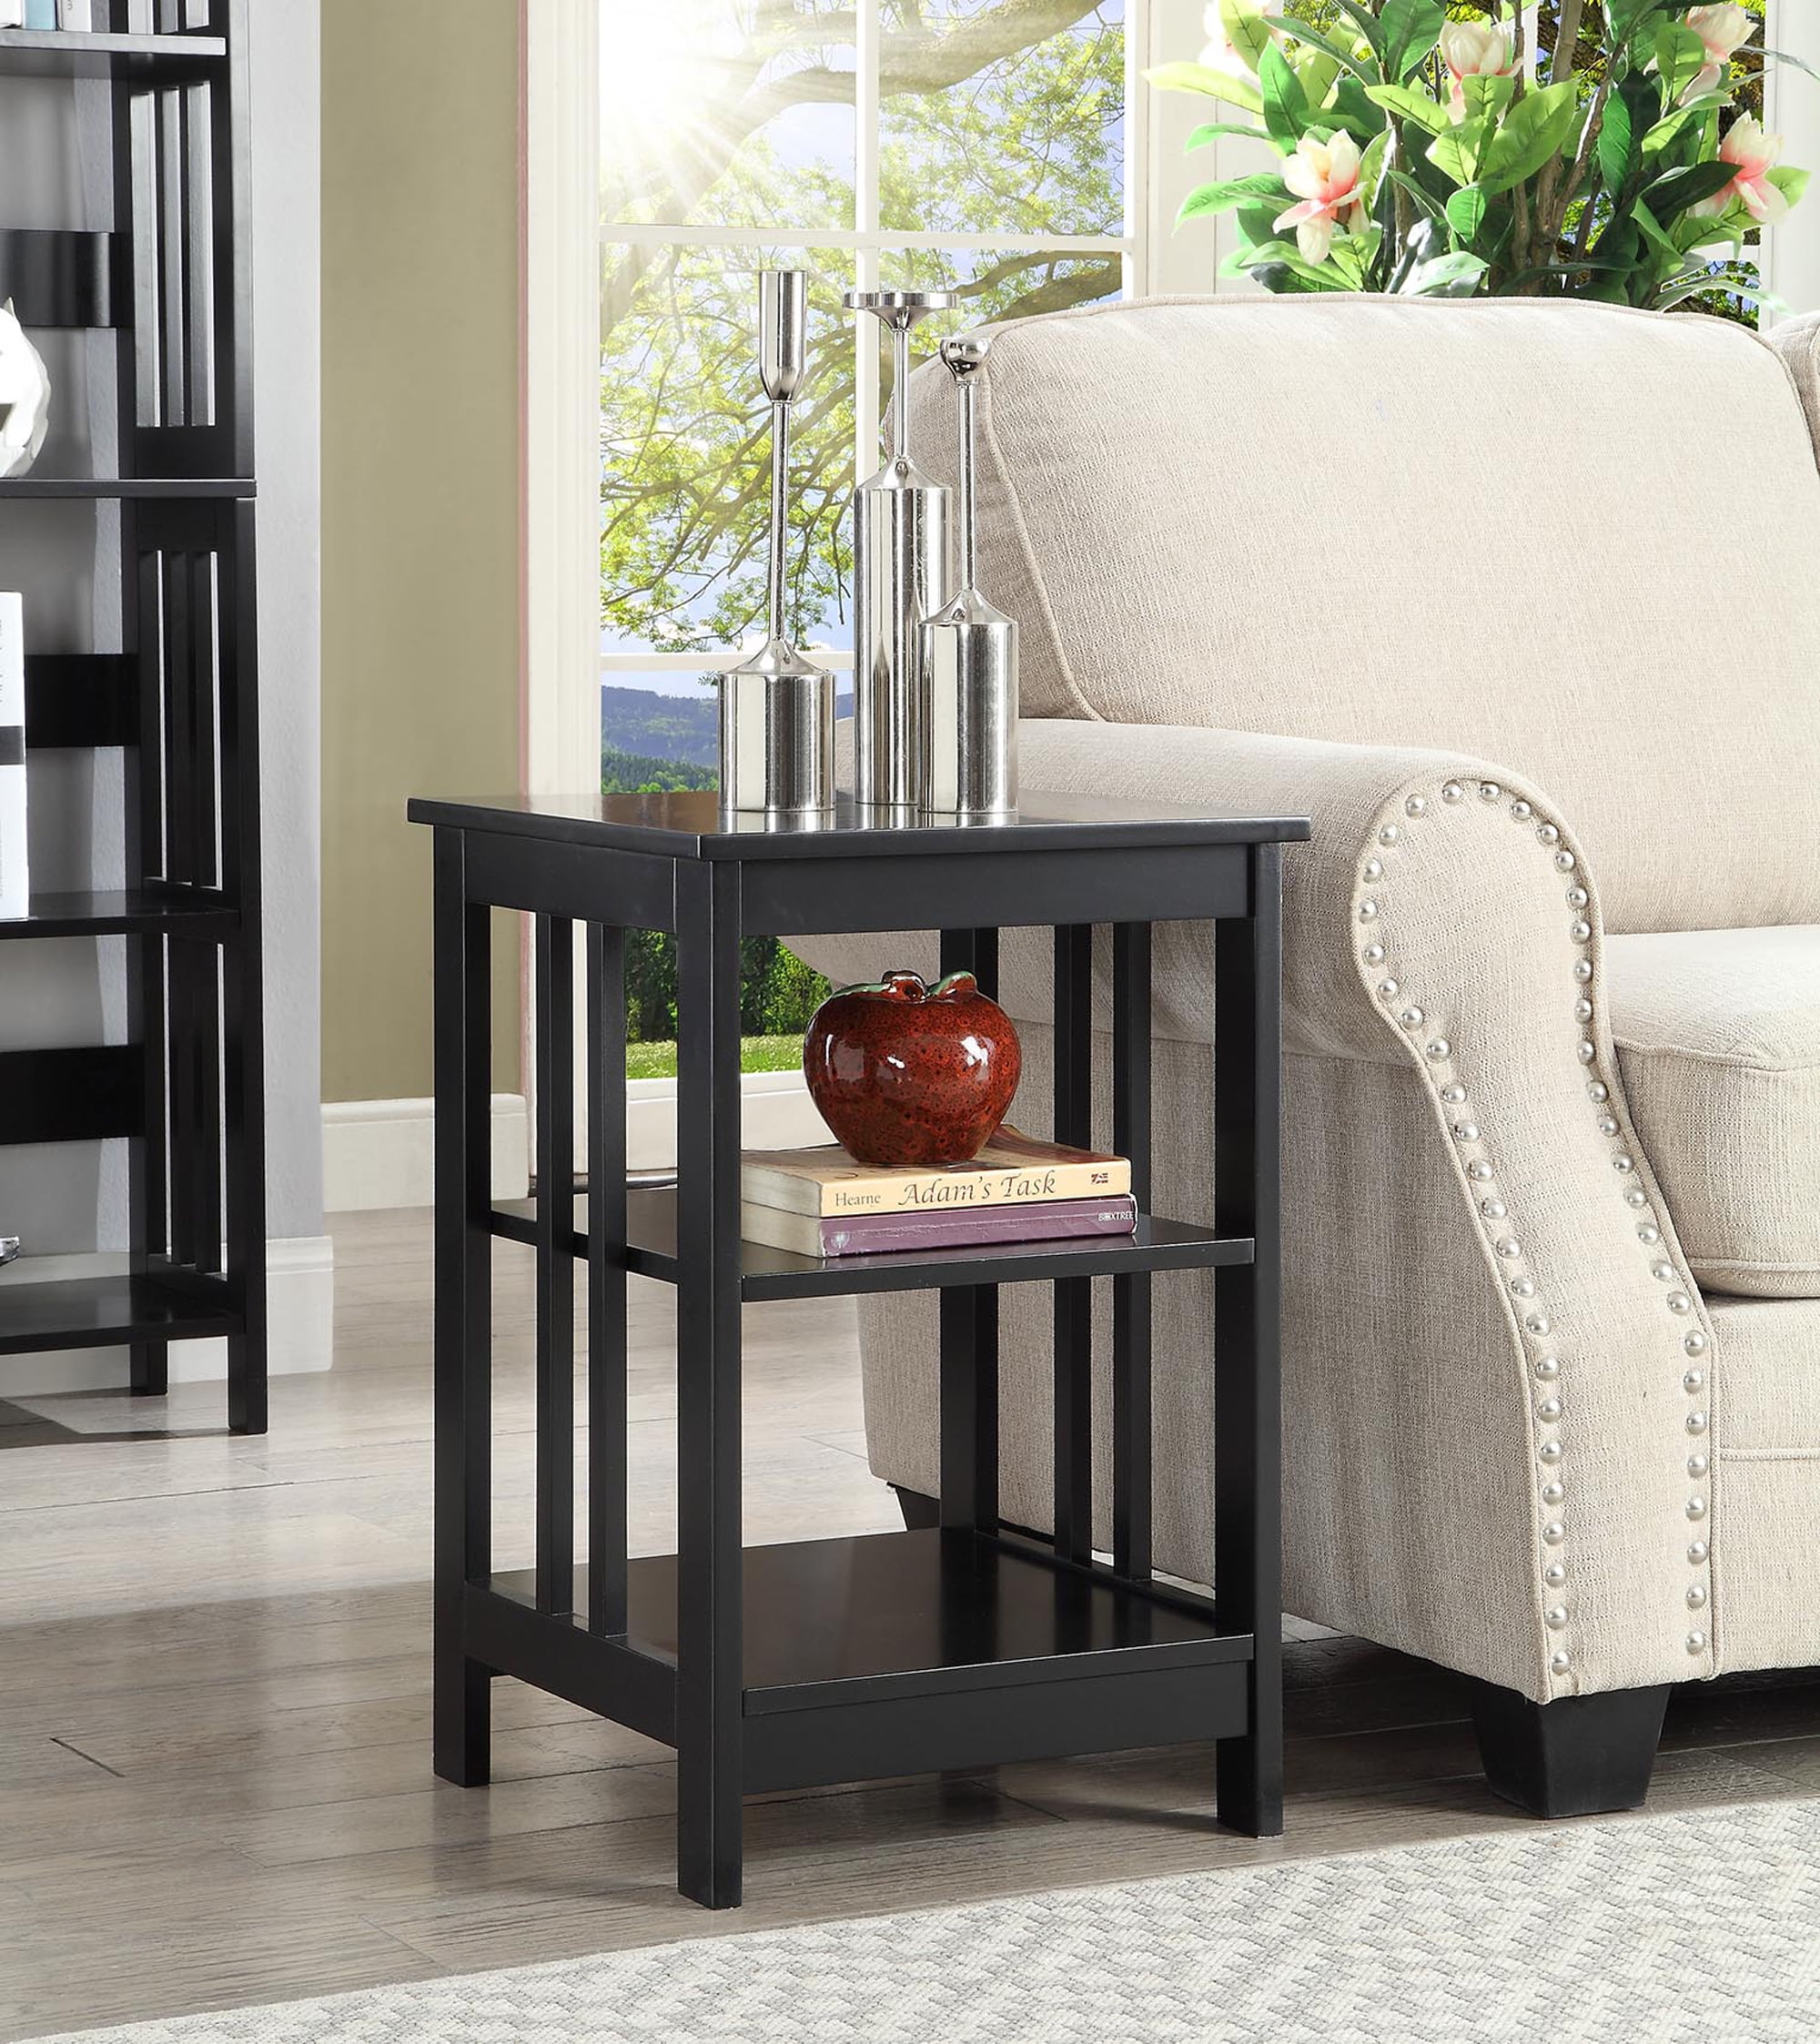 203385bl End Table, Black - 15.75 X 15.75 X 23.75 In.